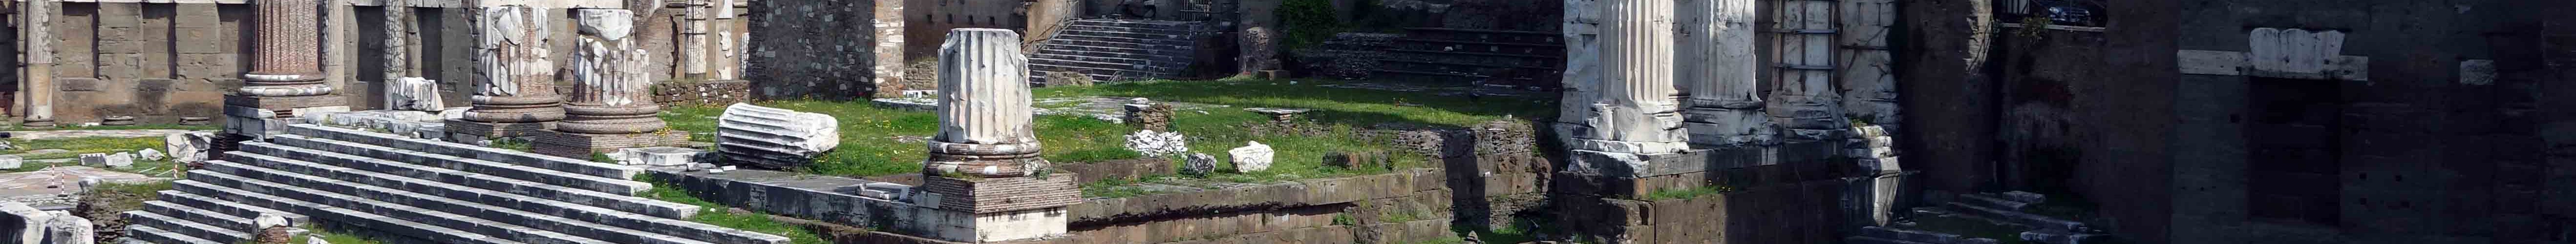 Ruins of the Temple of Mars Ultor in the Forum Augusti, c. 2 B.C.E.; the stairs to the temple platform are visible (left) and the paving stones of one portico can be seen at the lower right